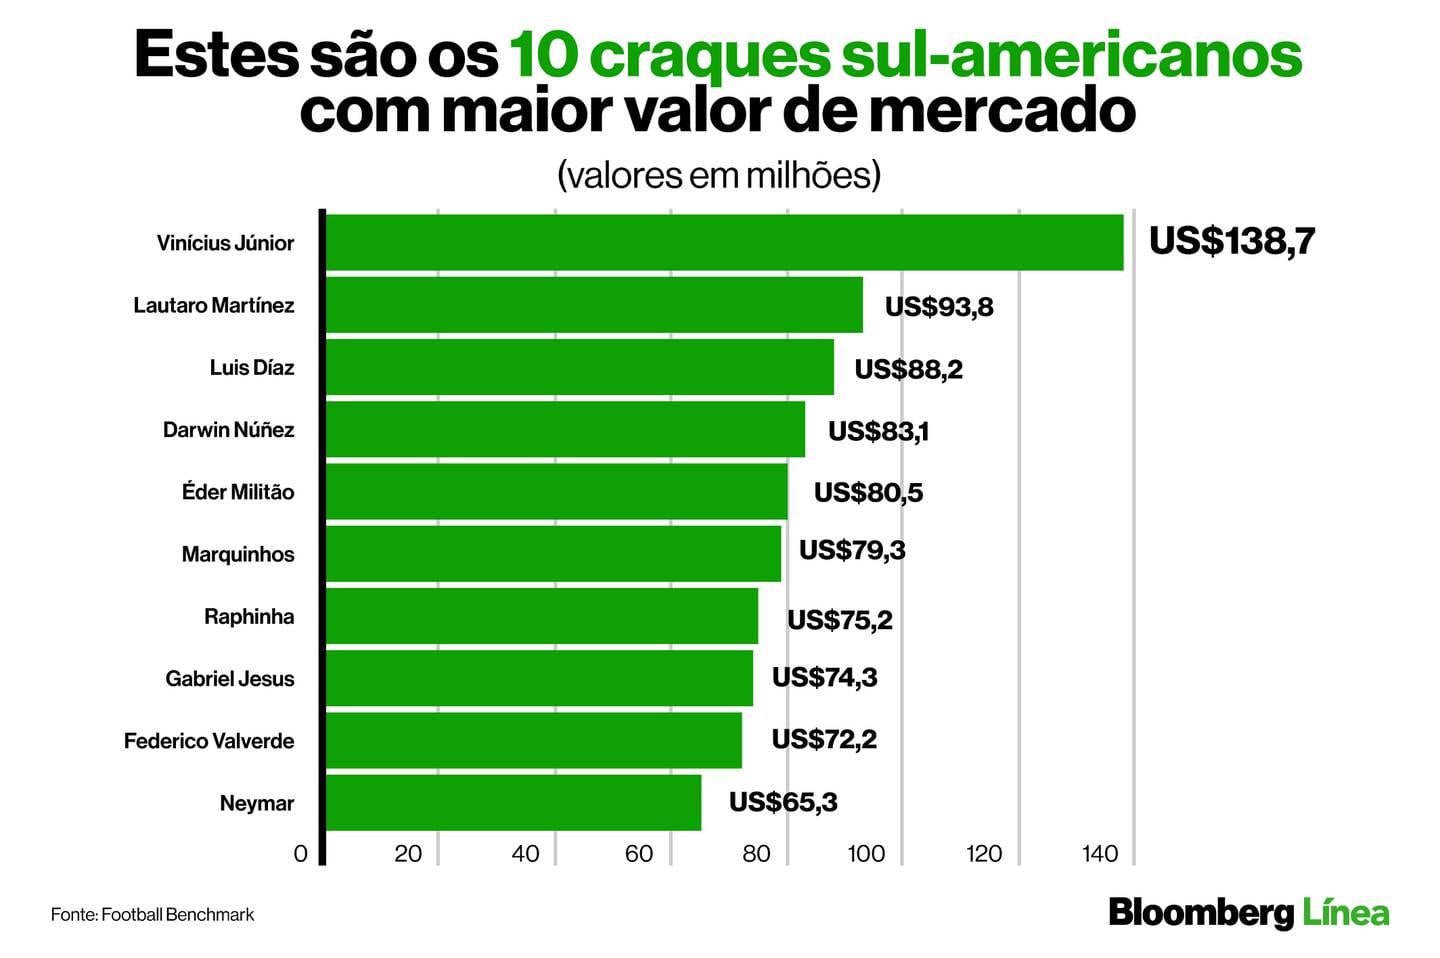 Chart with the 10 most valuable players in South America who play in the main European leaguesdfd